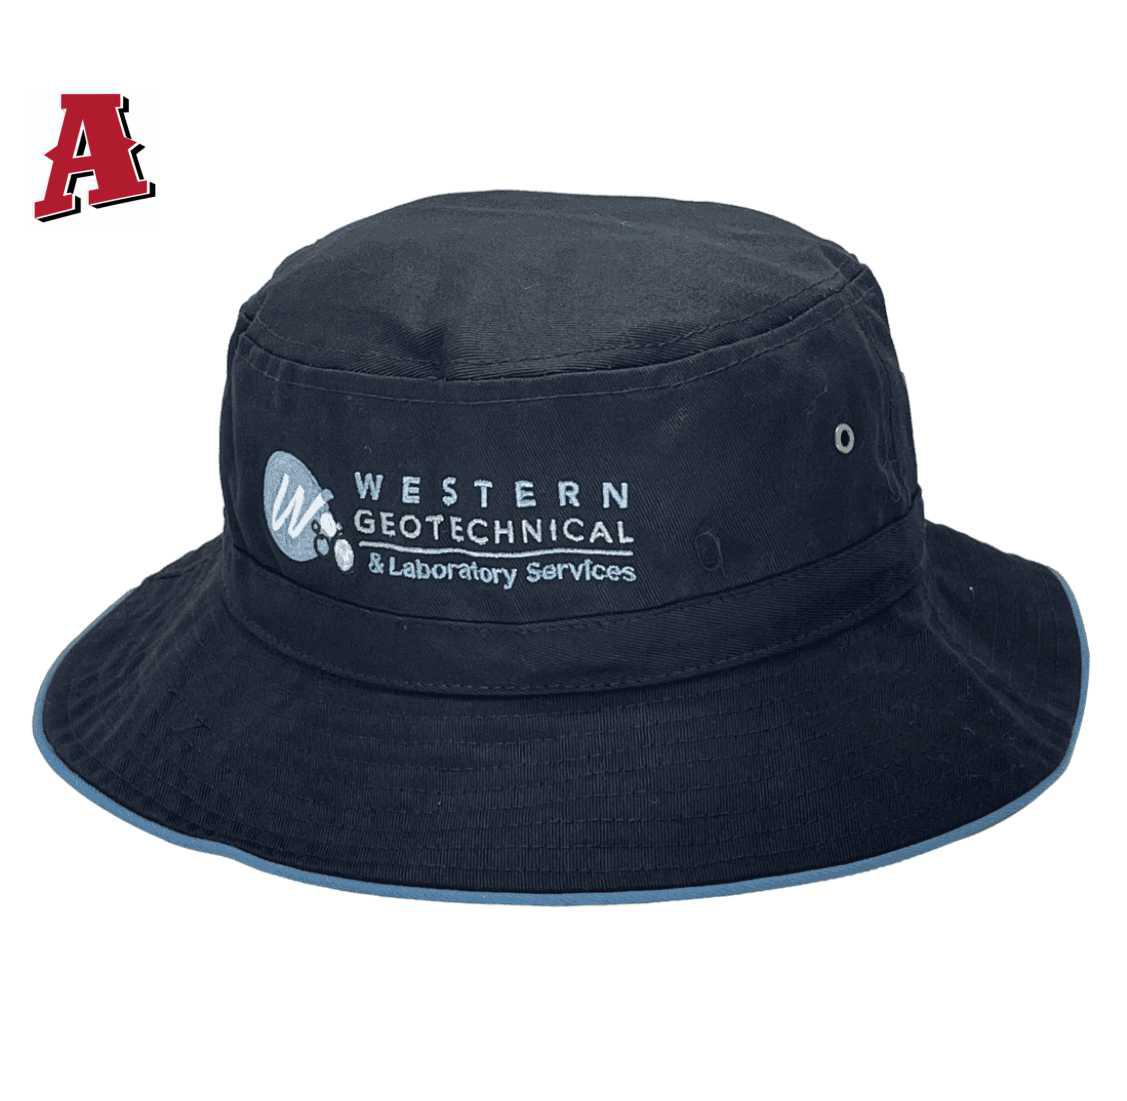 Western Geotechnical and Laboratory Services Welshpool WA Aussie Bucket Hat One Size Fits All Toggle Crown with Optional Brim Size